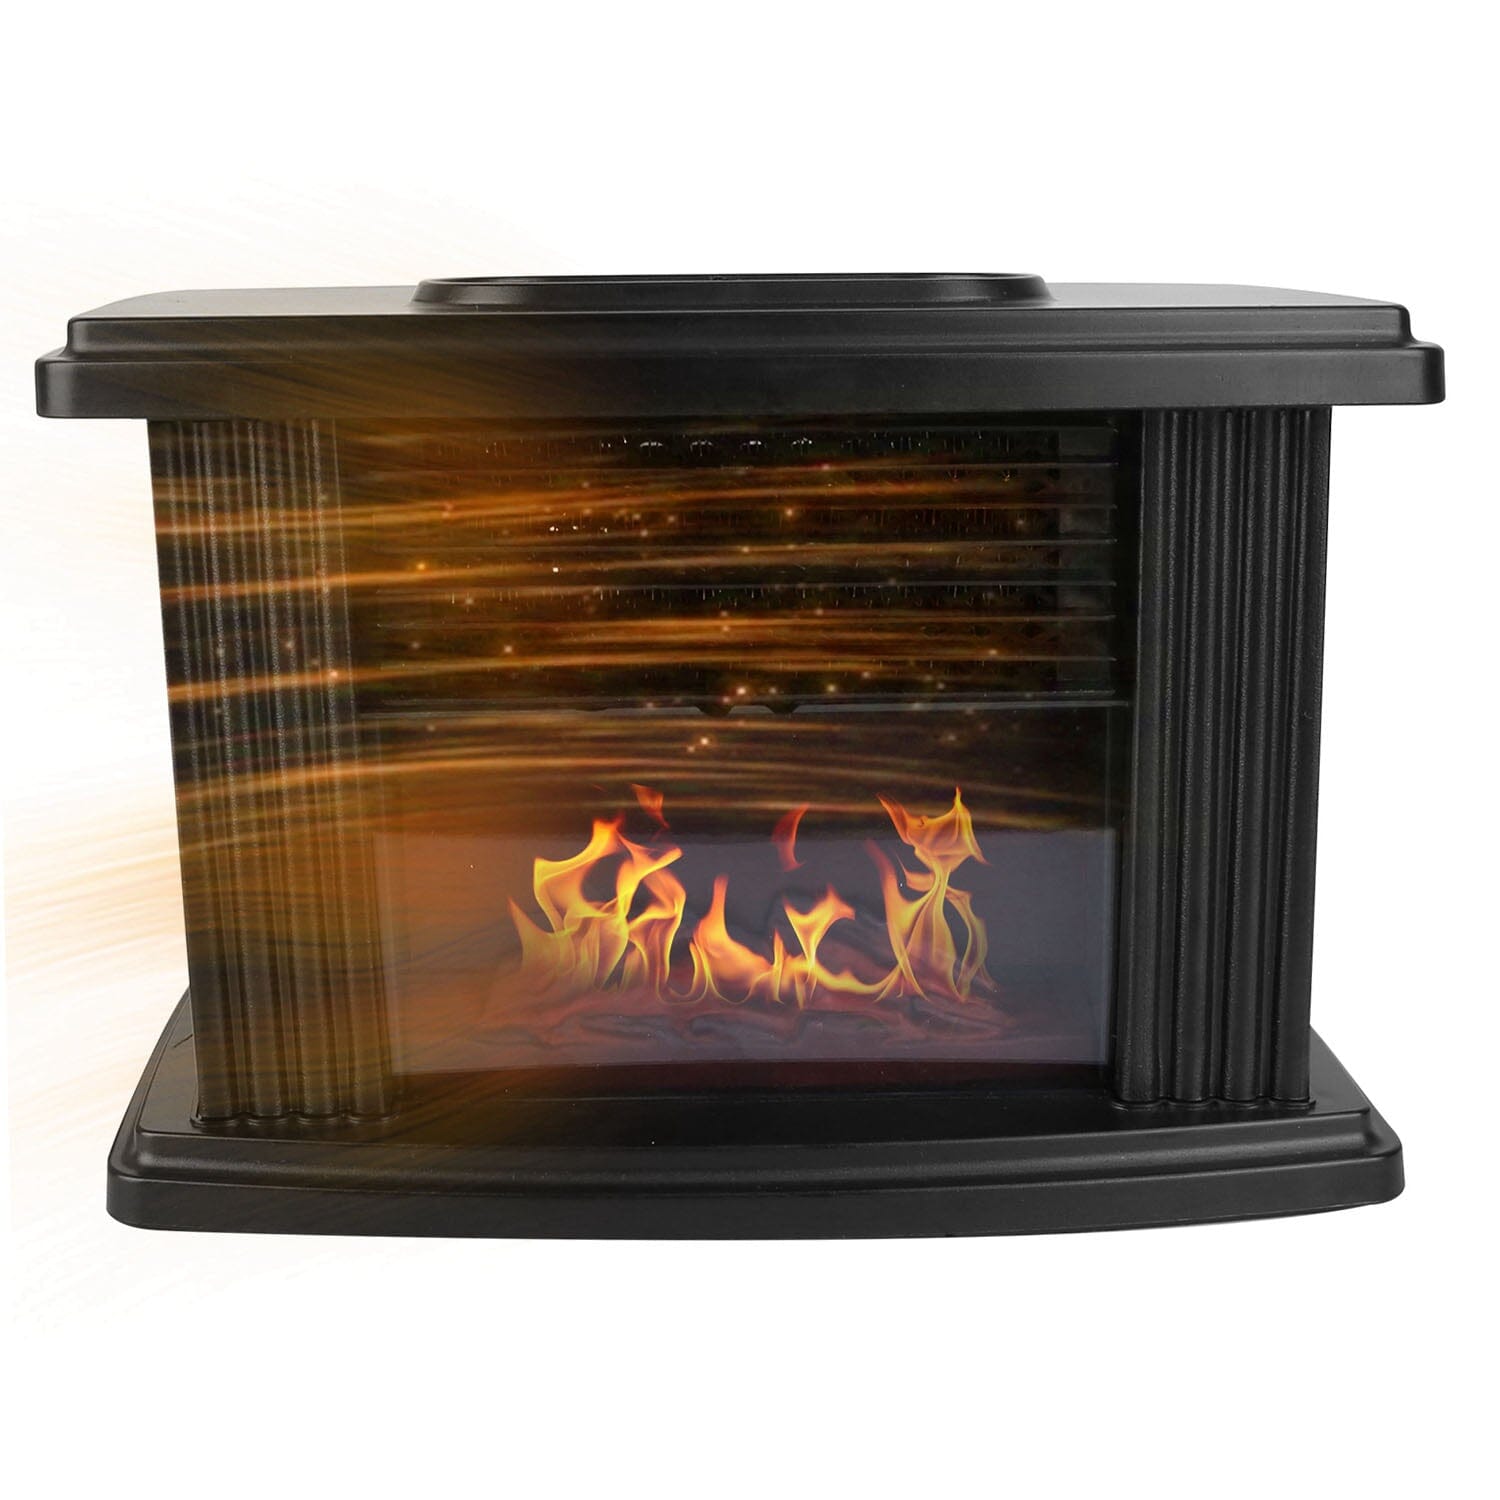 http://dailysale.com/cdn/shop/files/800w-artificial-flame-stove-electric-fireplace-heater-household-appliances-dailysale-265030.jpg?v=1702732441